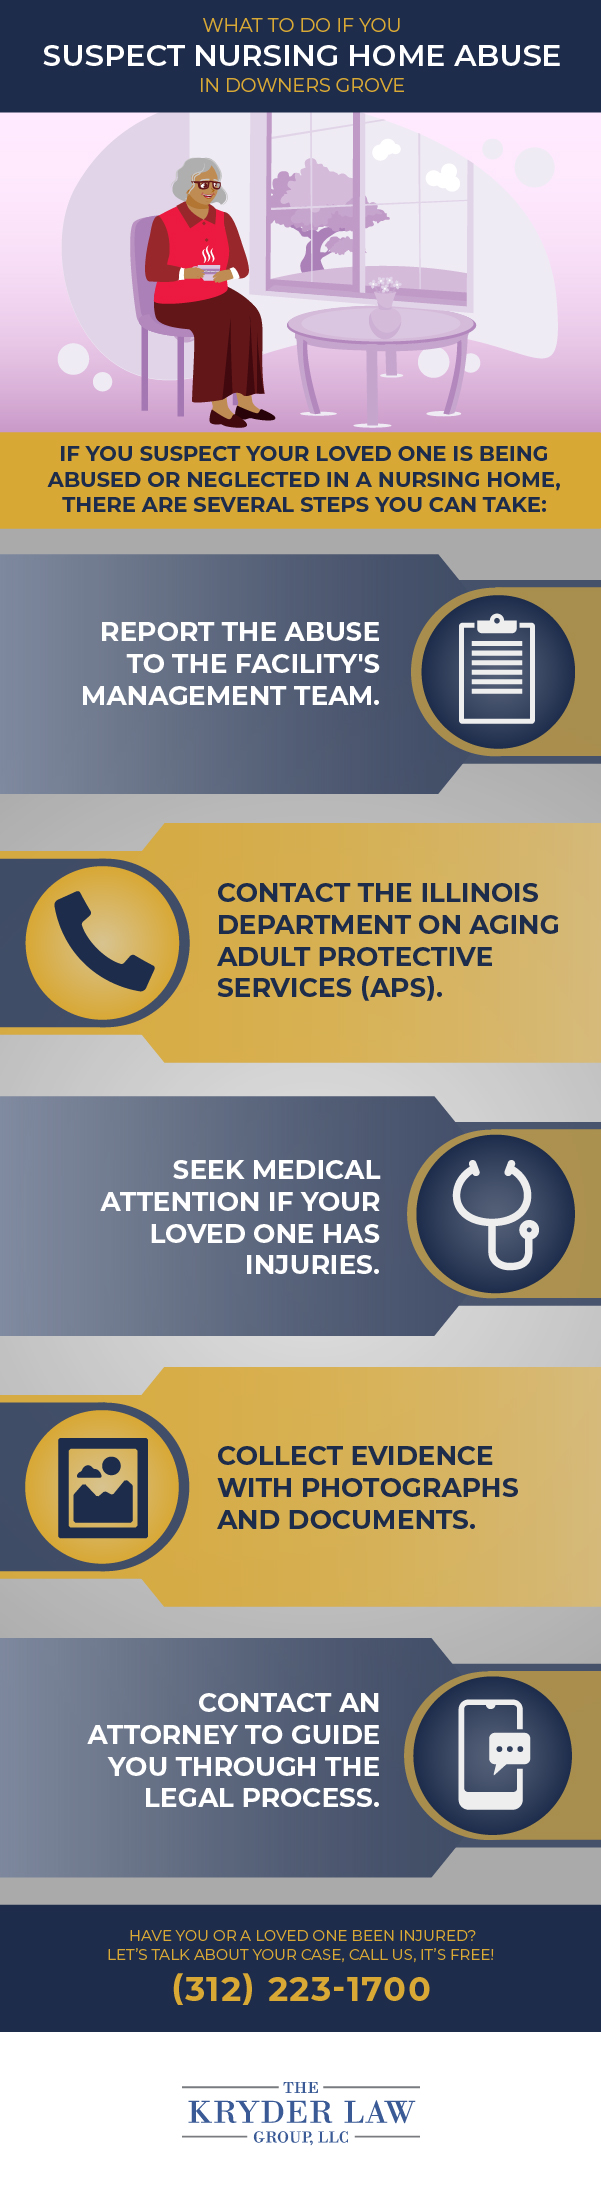 What To Do If You Suspect Nursing Home Abuse in Downers Grove